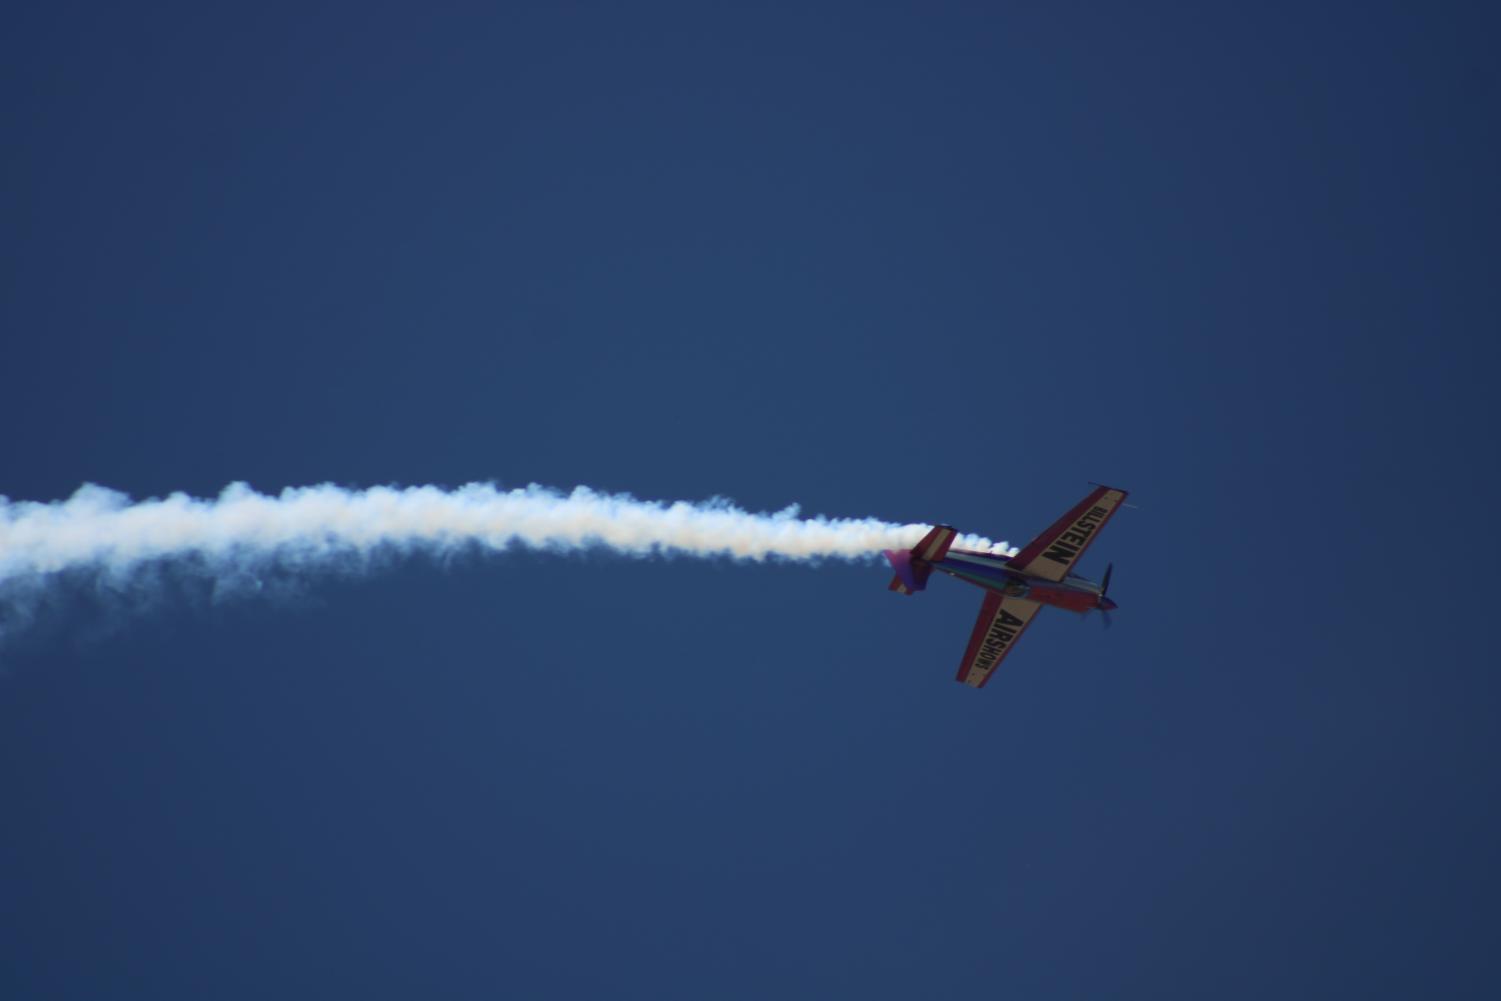 2022+Airshow+at+Mcconnell+%28Photos+by+Laurisa+Rooney%29